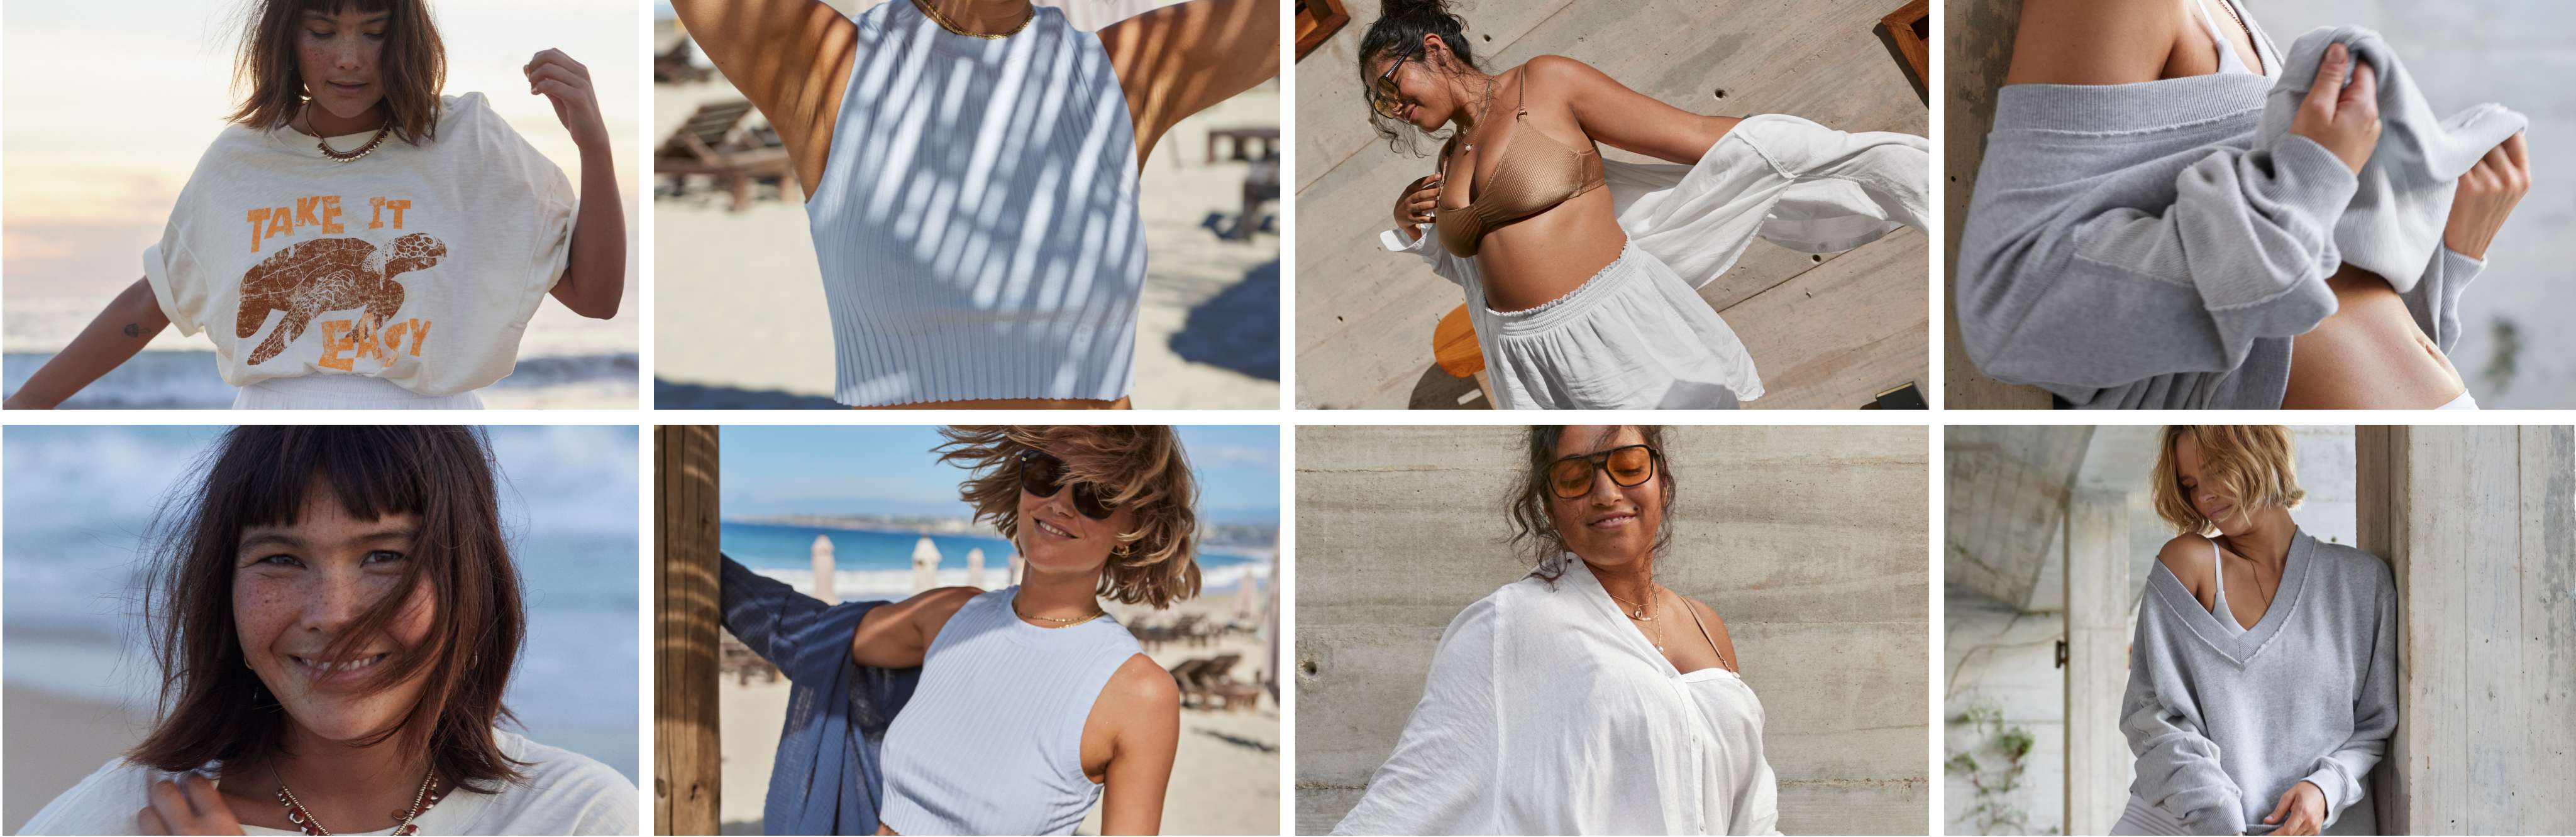 https://s7d2.scene7.com/is/image/aeo/20240315-SU1-aerie-static-CLOTHING-tops-lg?defaultImage=20240315-SU1-aerie-static-CLOTHING-tops-lg&scl=1&qlt=60&fmt=jpeg